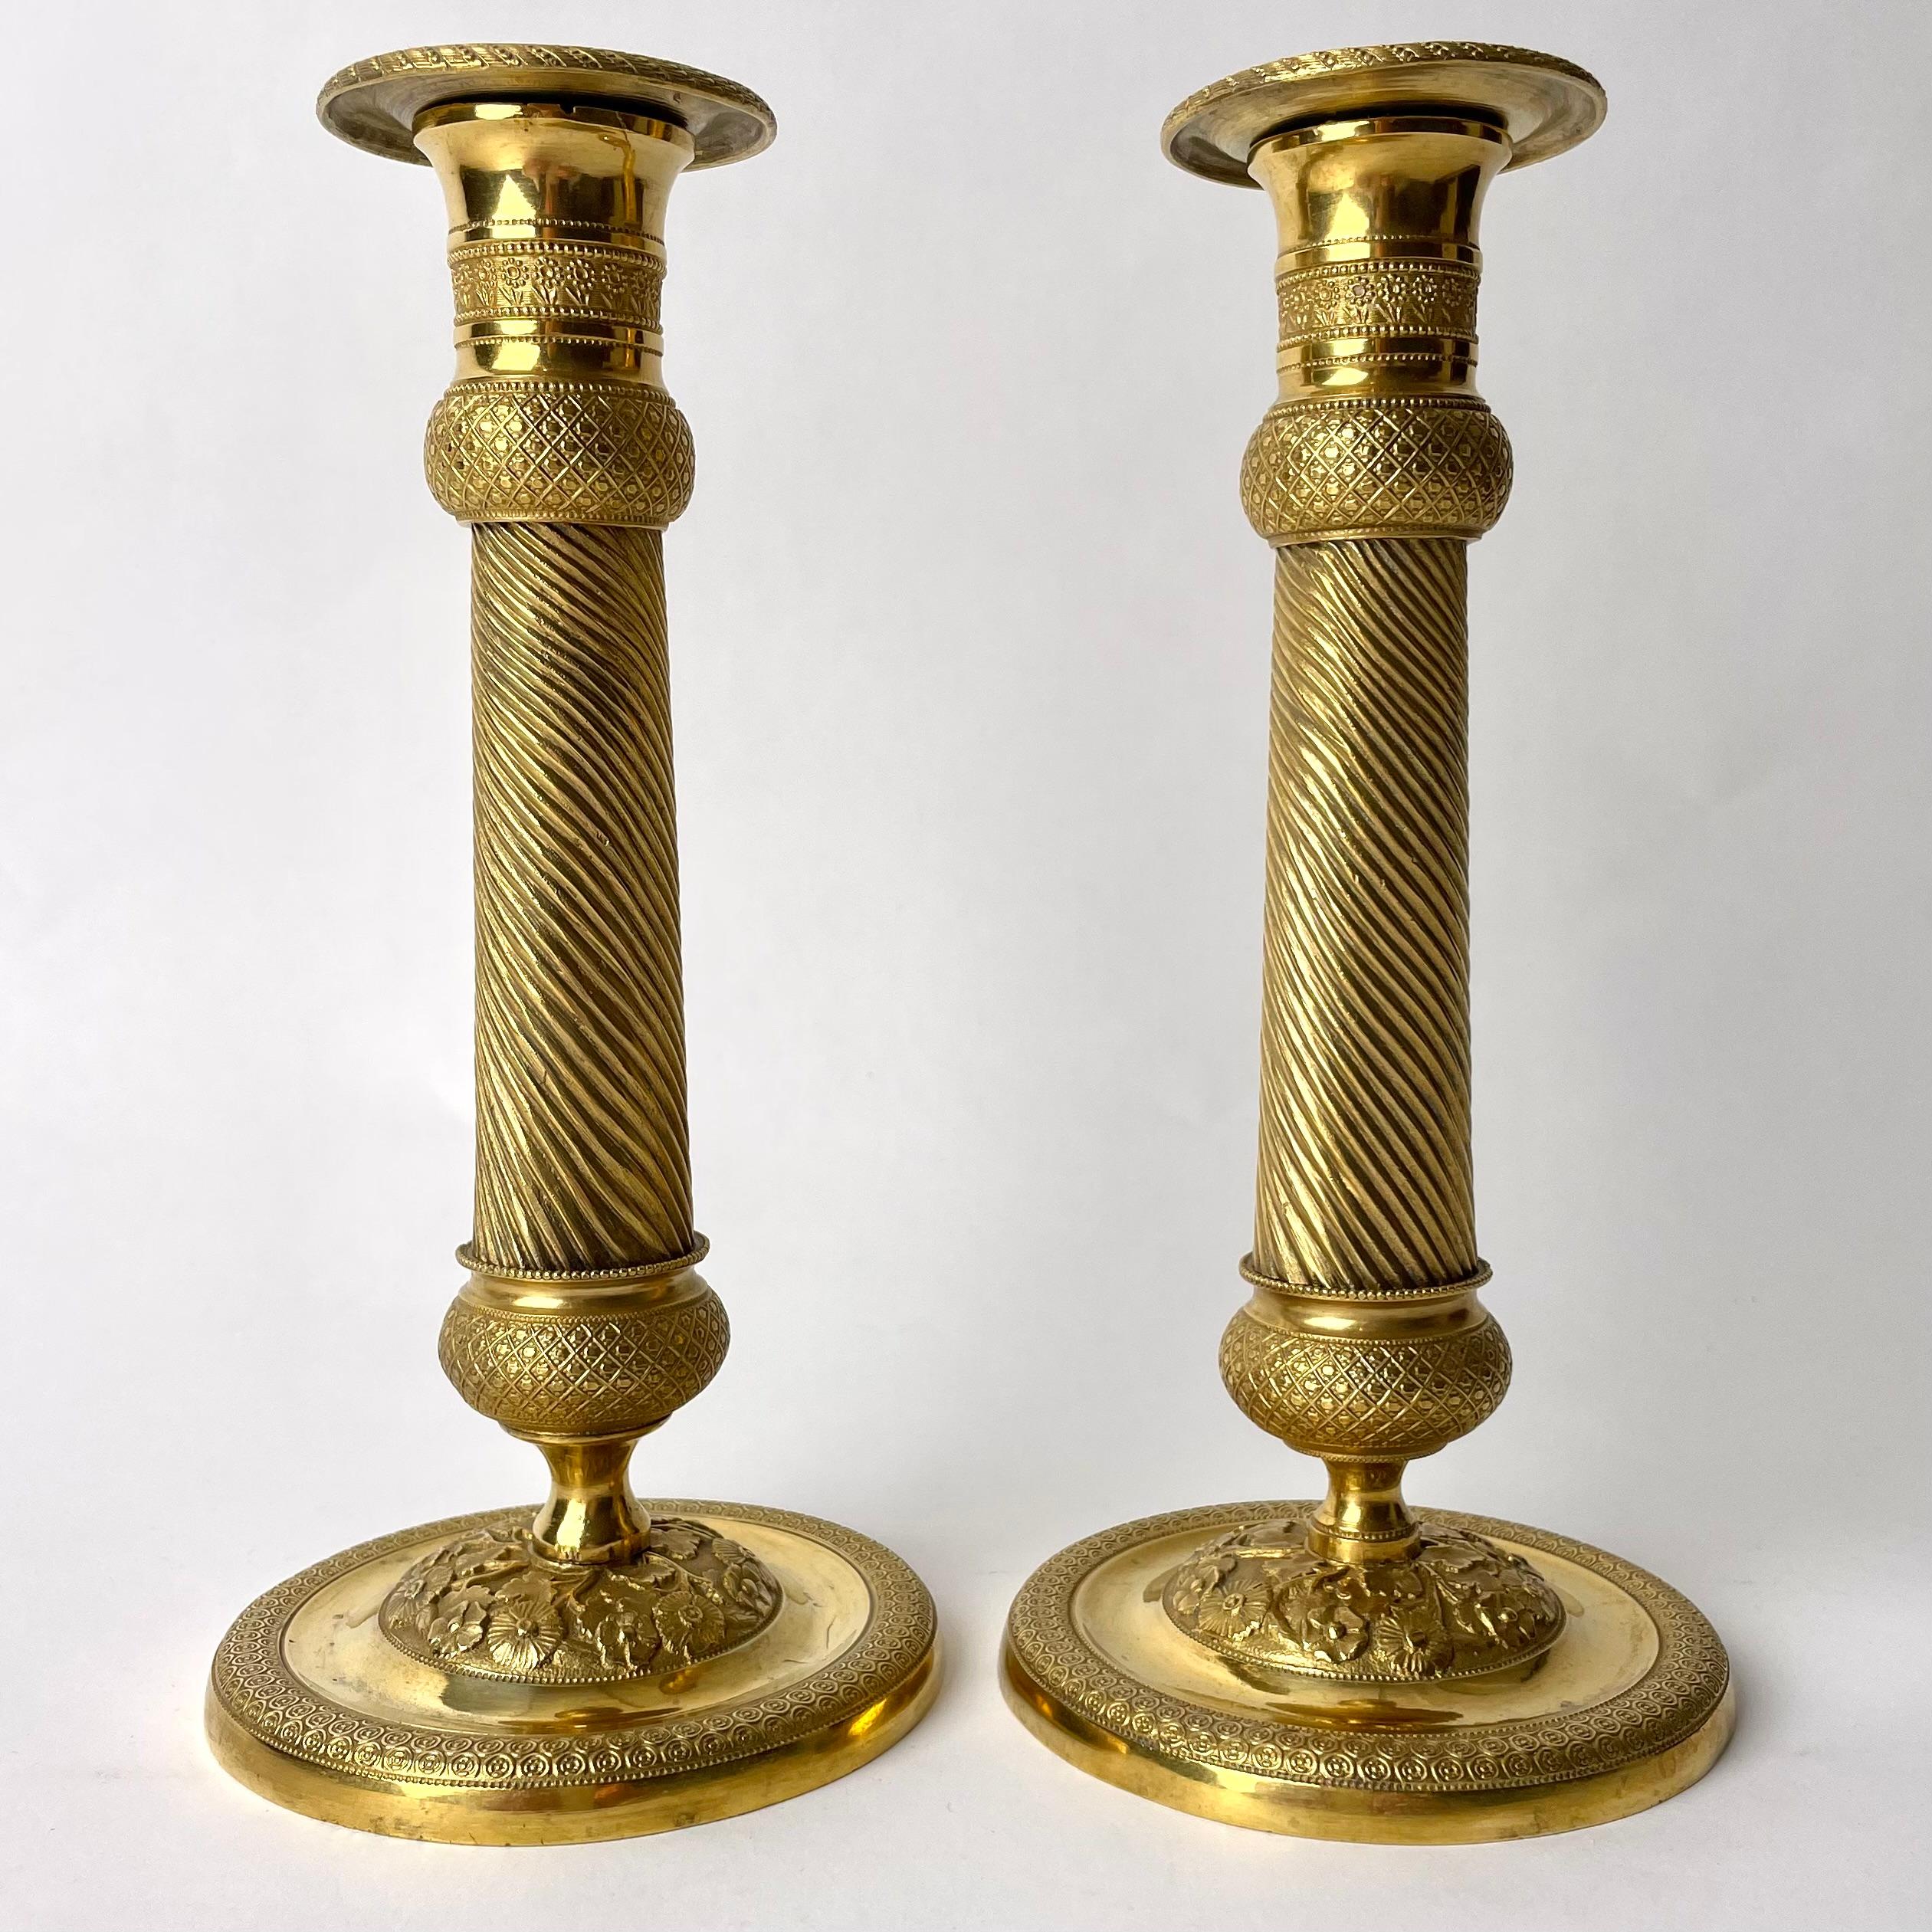  A pair of Gilded French Empire Candlesticks with charming decor from the 1820s. Beautiful decorated with flowers and other period empire decorations.

Wear consistent with age and use 